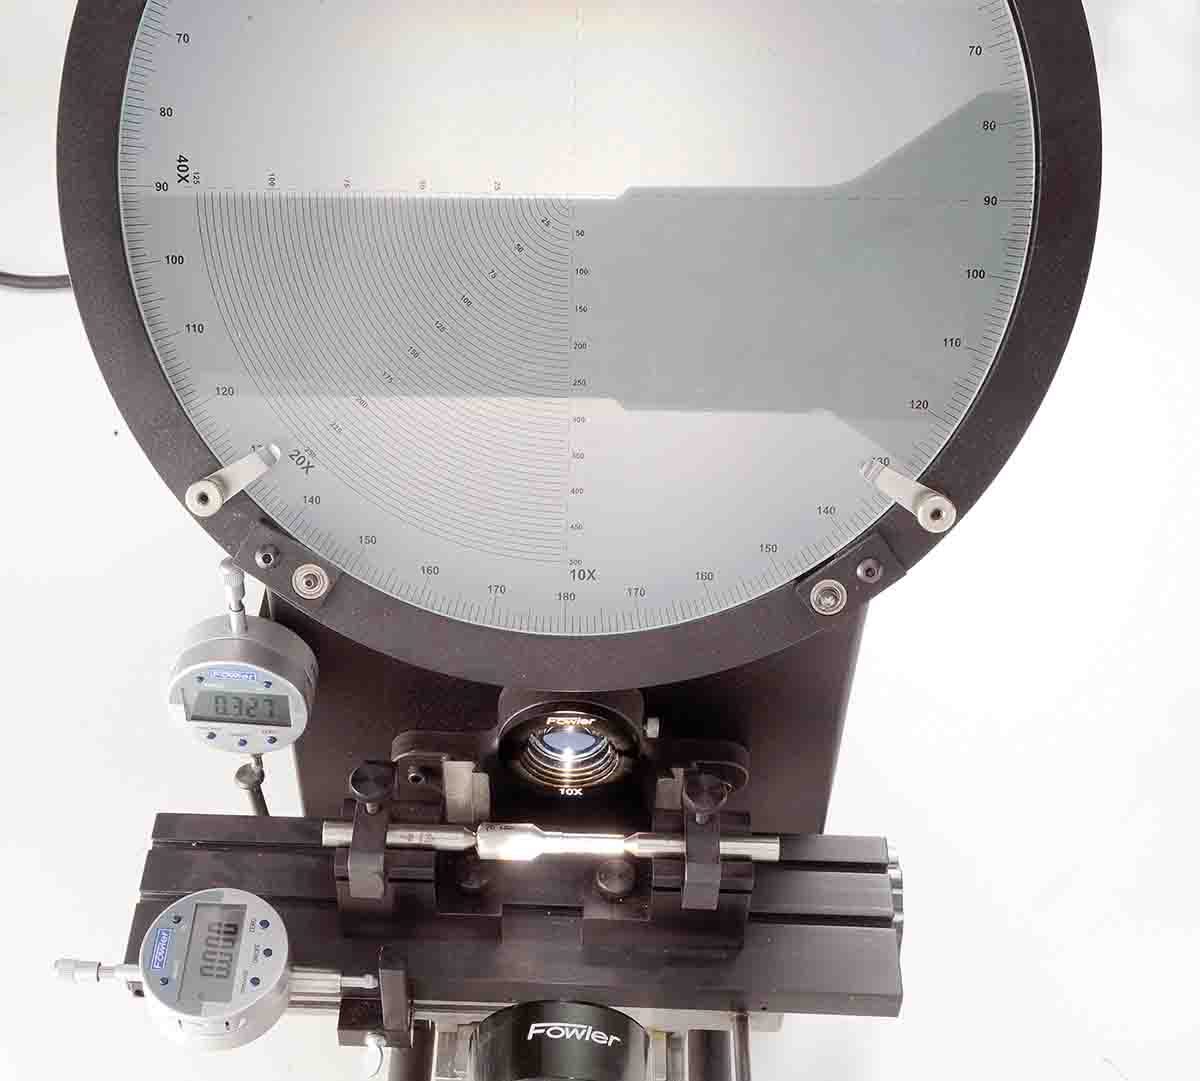 The chamber cast was gauged with an optical comparator to gain the most precise measurements possible. The comparator shines a bright light on the chamber cast and projects a magnified and precise shadow profile. It has a mechanism that translates table movement and the chamber cast to inches by means of digital indicators.